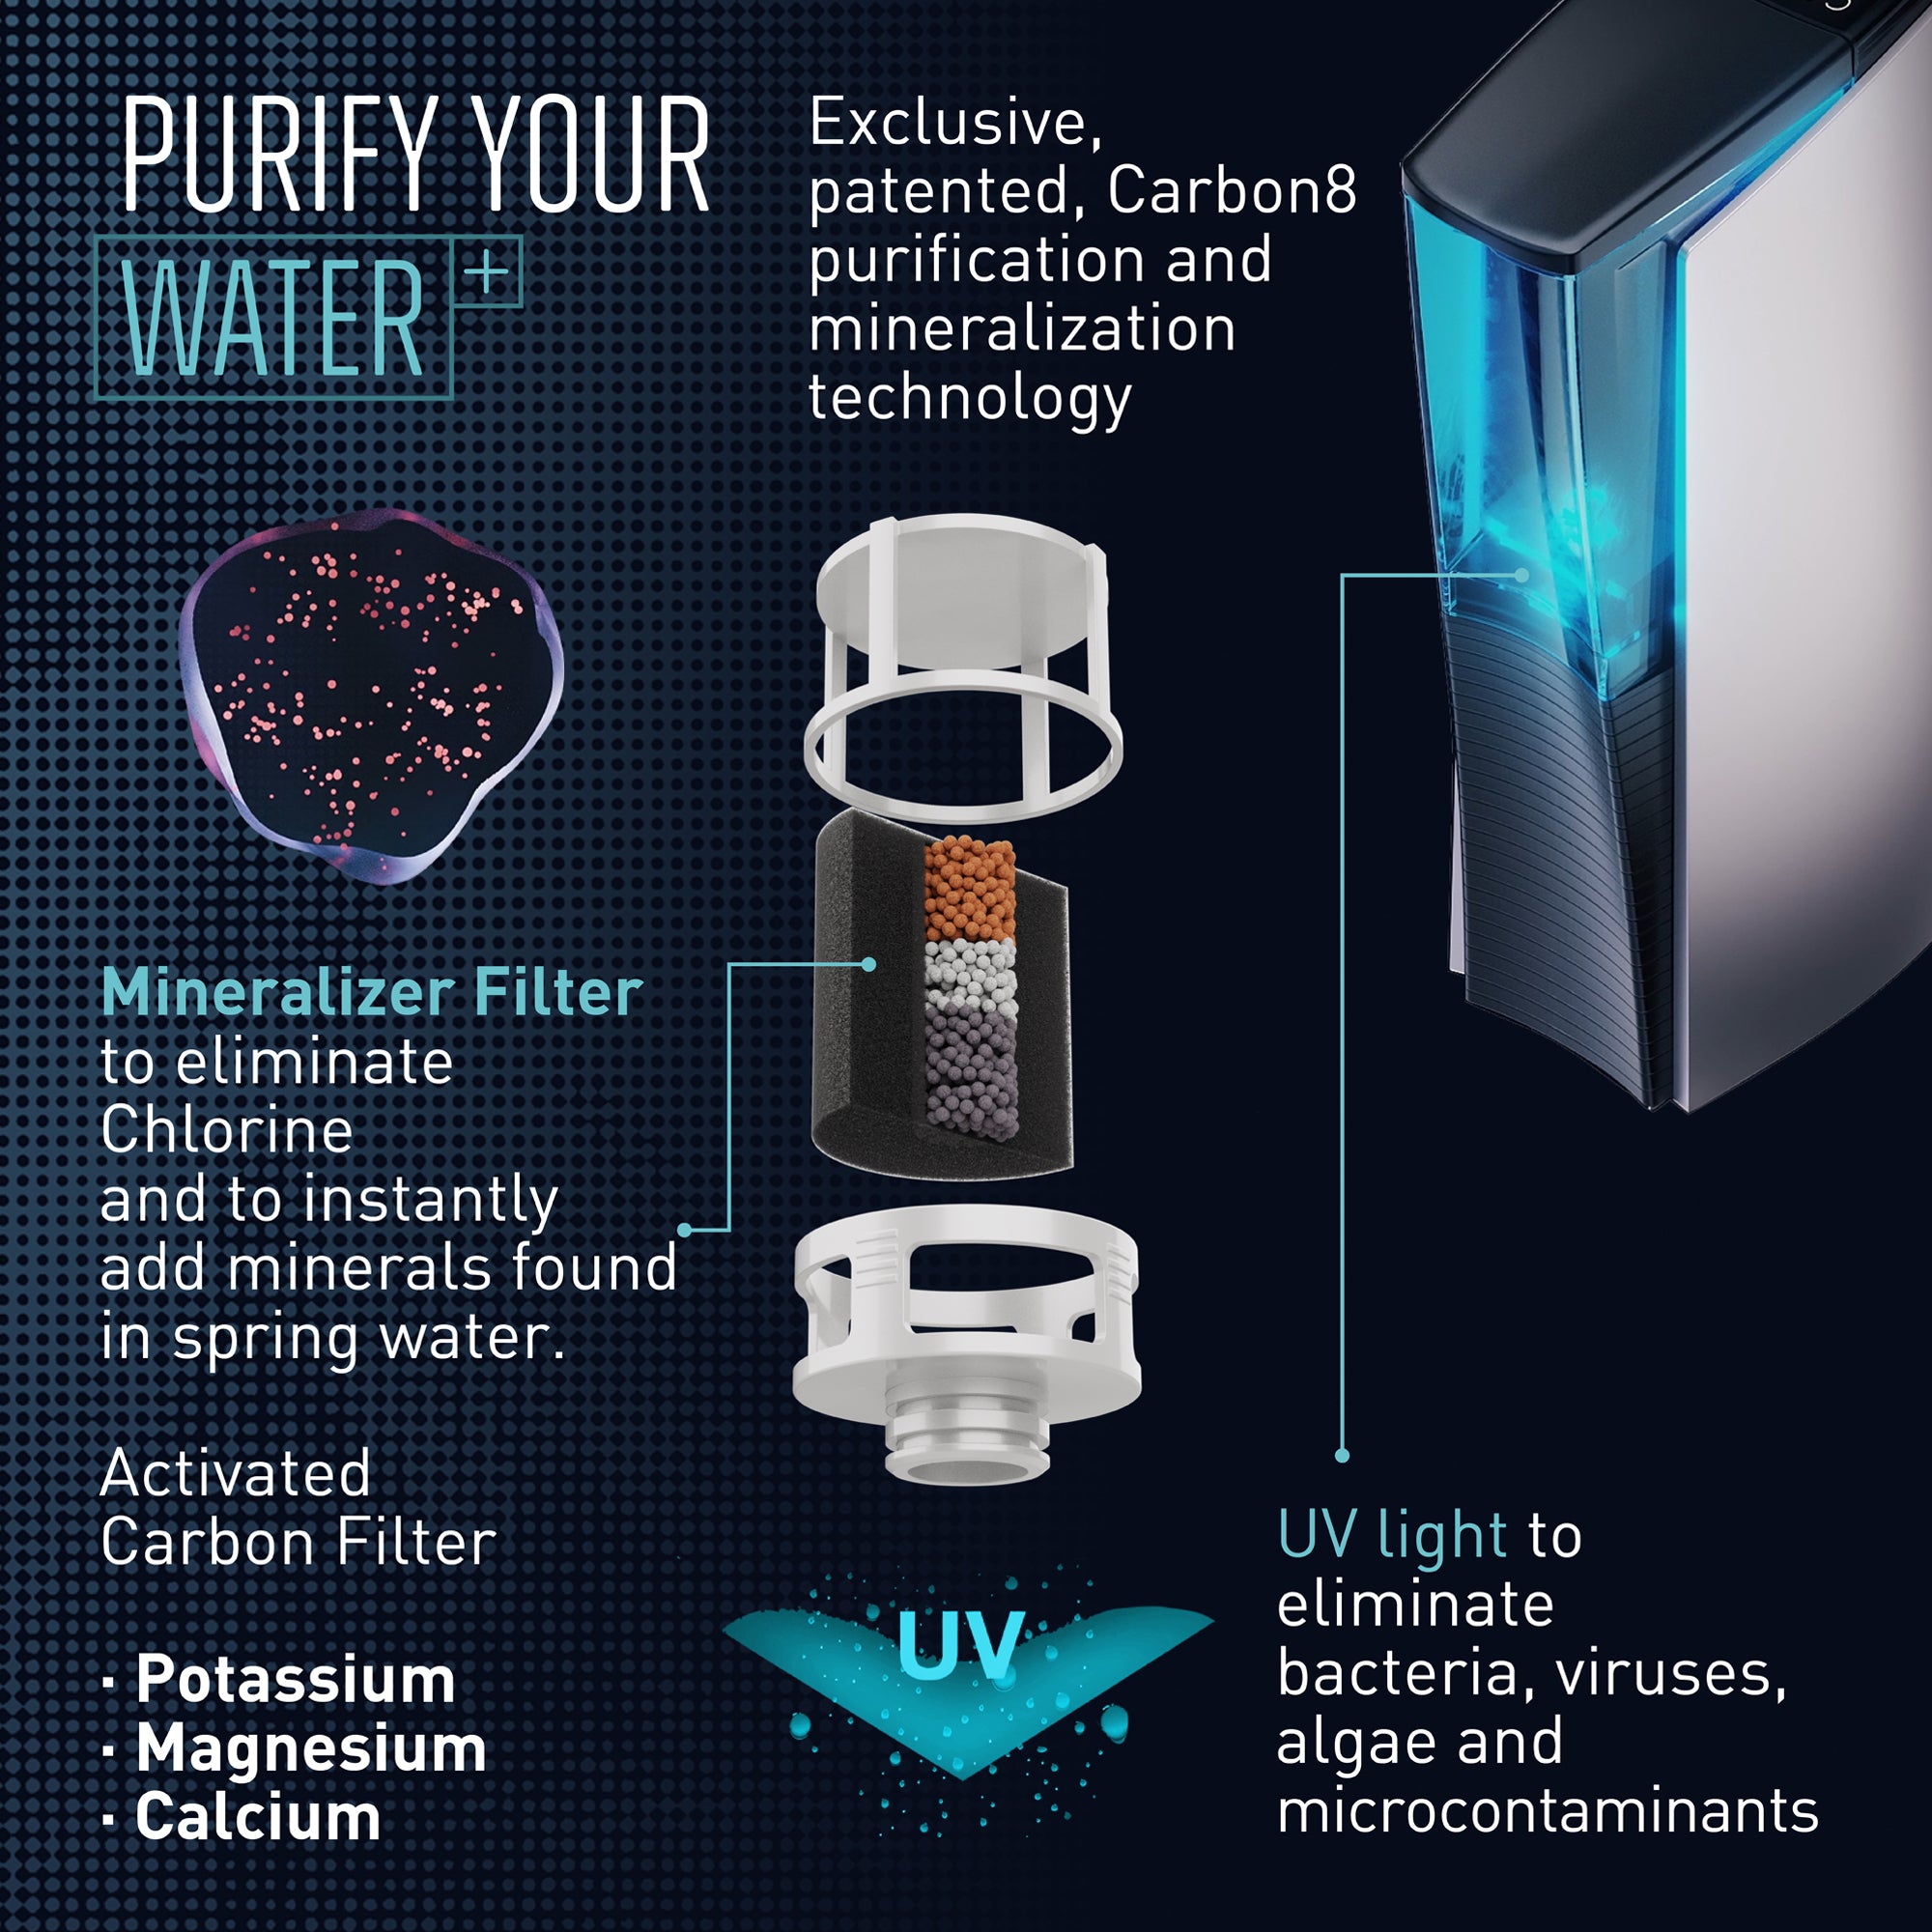 Mineralized Water Cartridge and Chlorine Filter